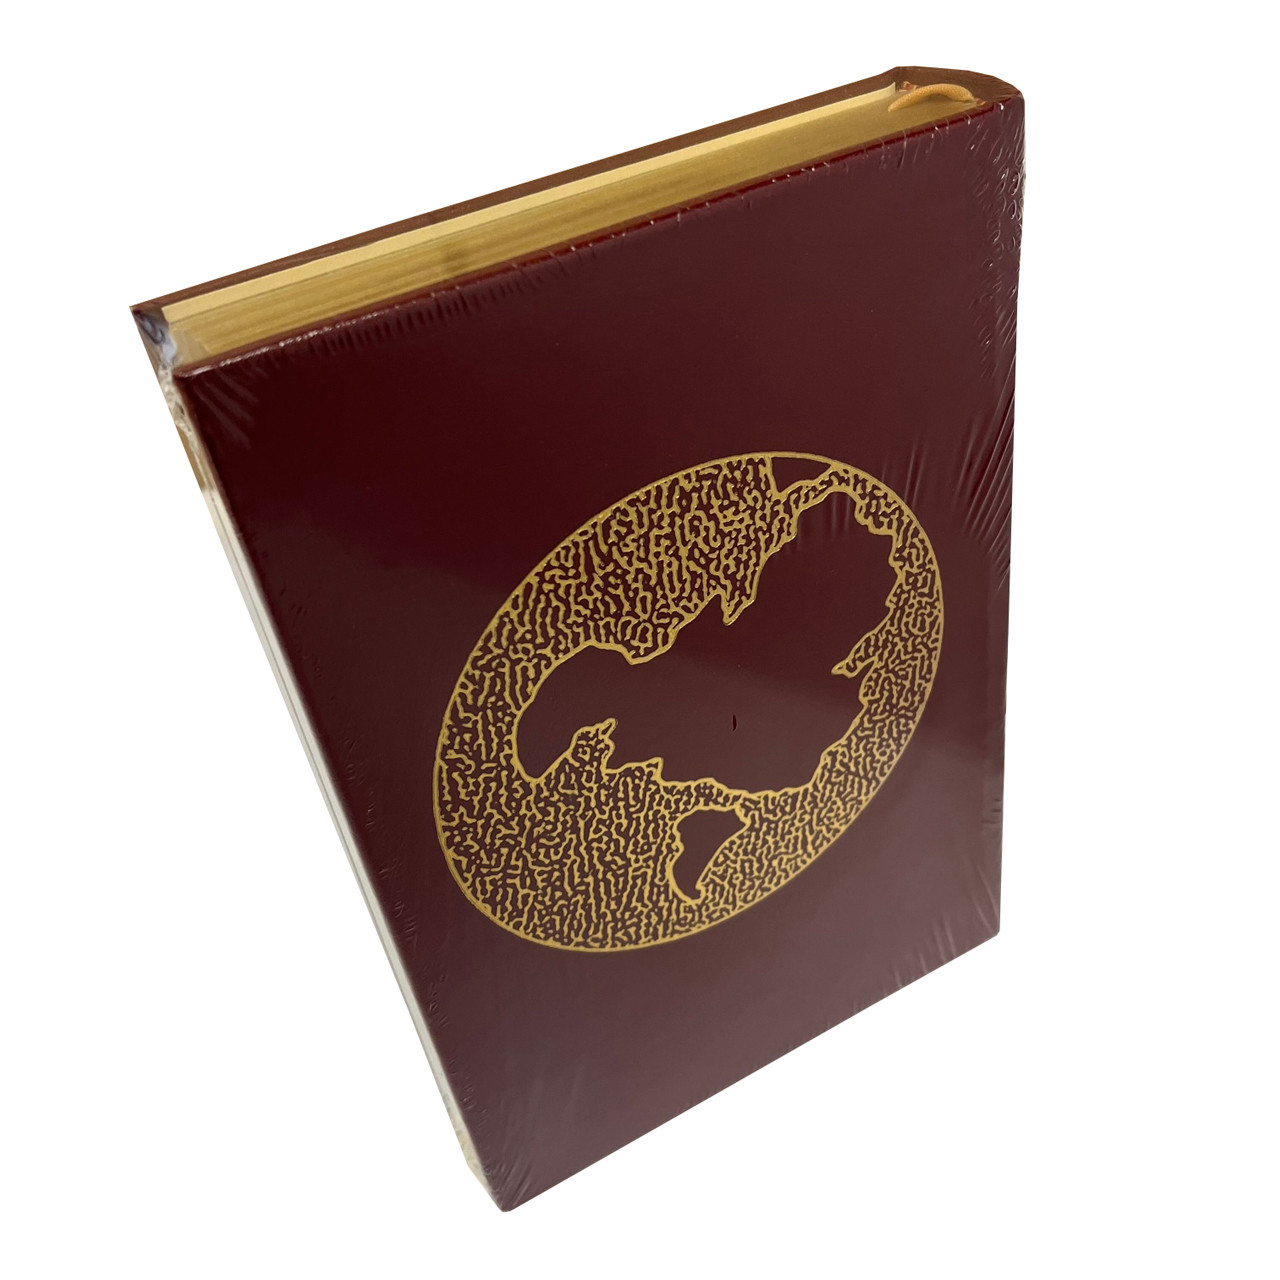 Ursula K. Le Guin "The Dispossessed" Limited Edition, Leather Bound Collector's Edition [Sealed]